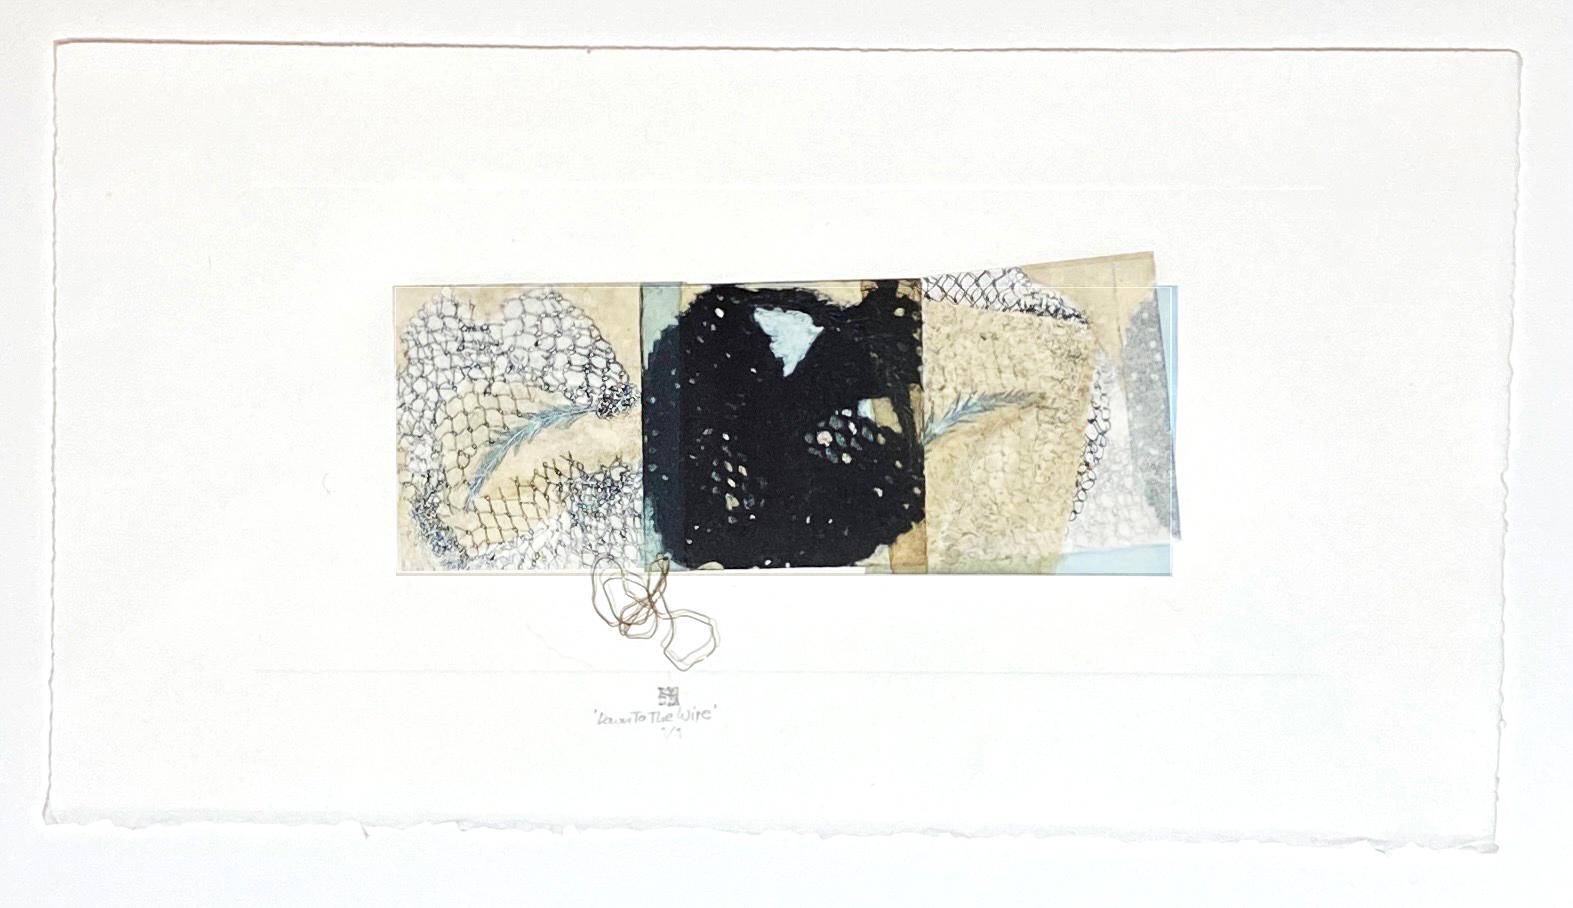 Karin Bruckner Abstract Print - DownToTheWire, mixed media monoprint on paper, neutral greys and earth tones